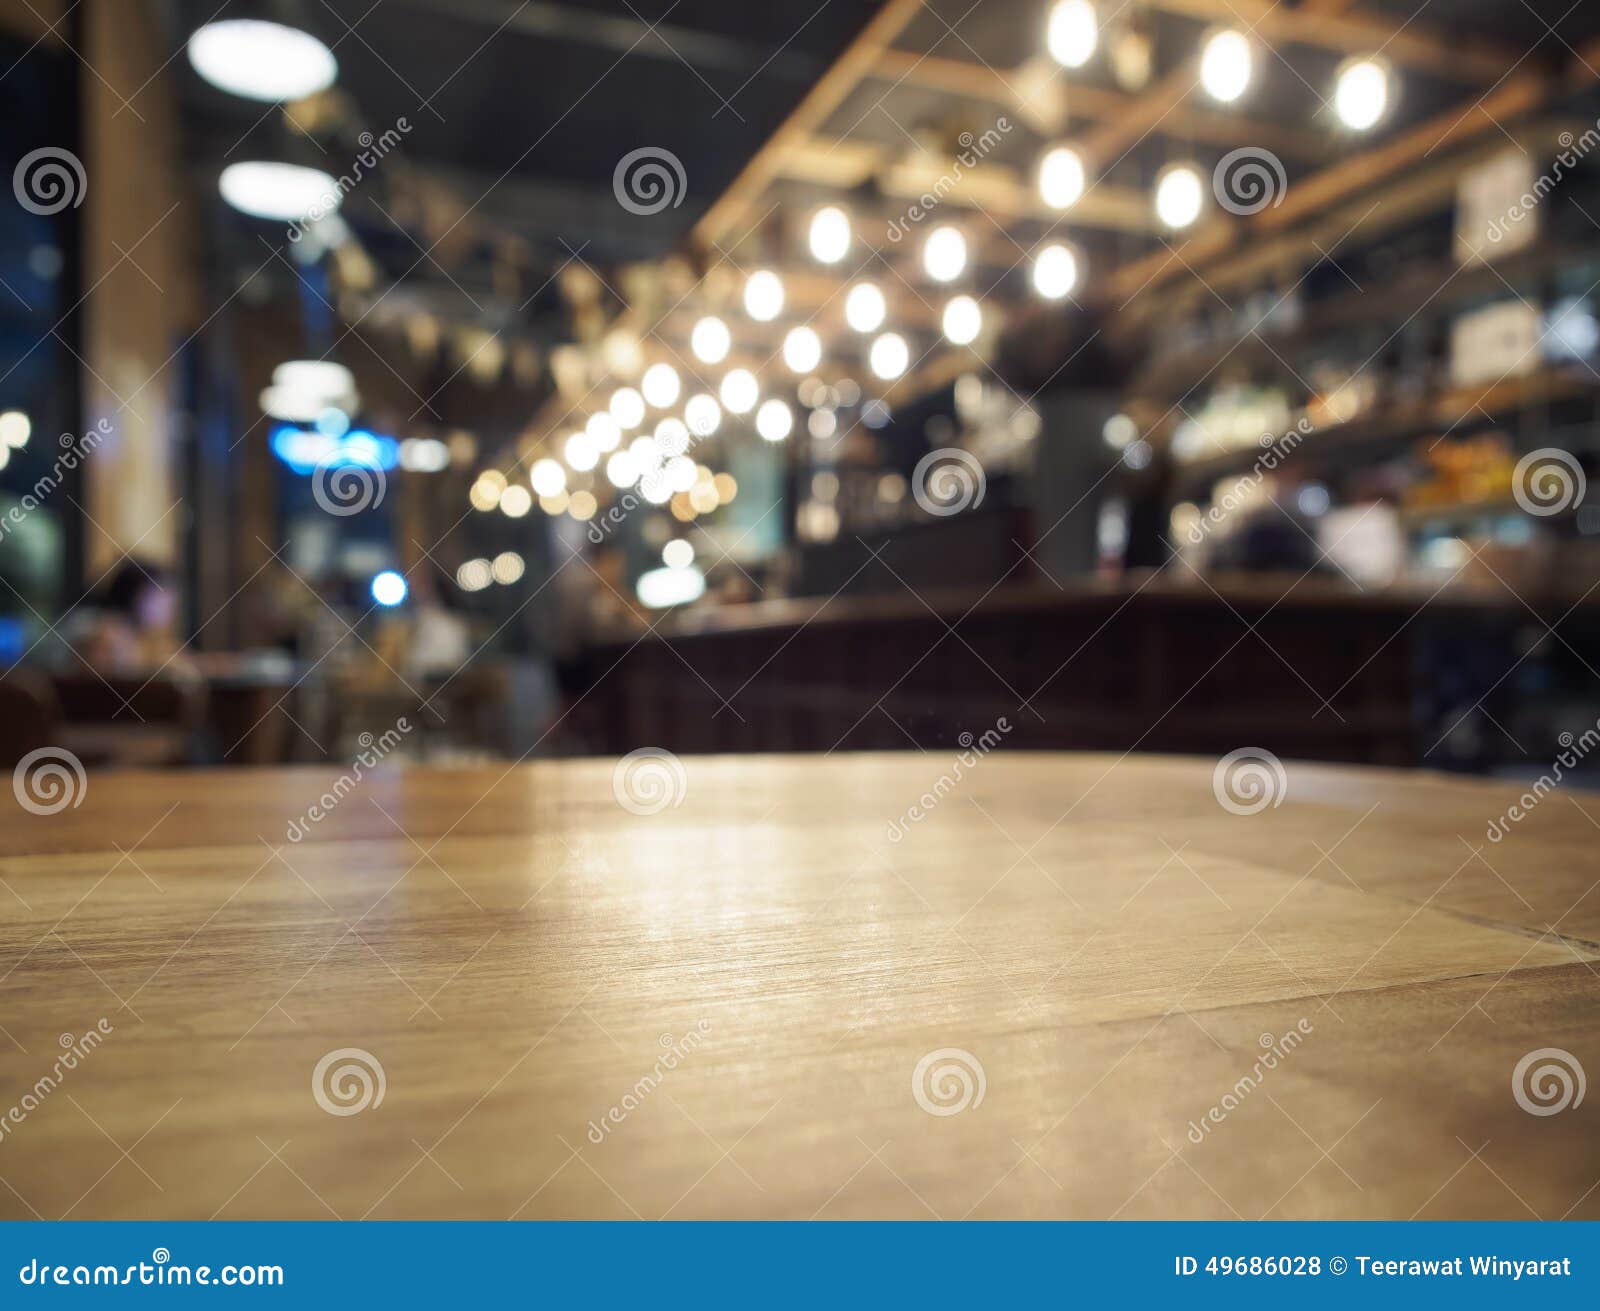 top of wooden table with blurred bar restaurant background